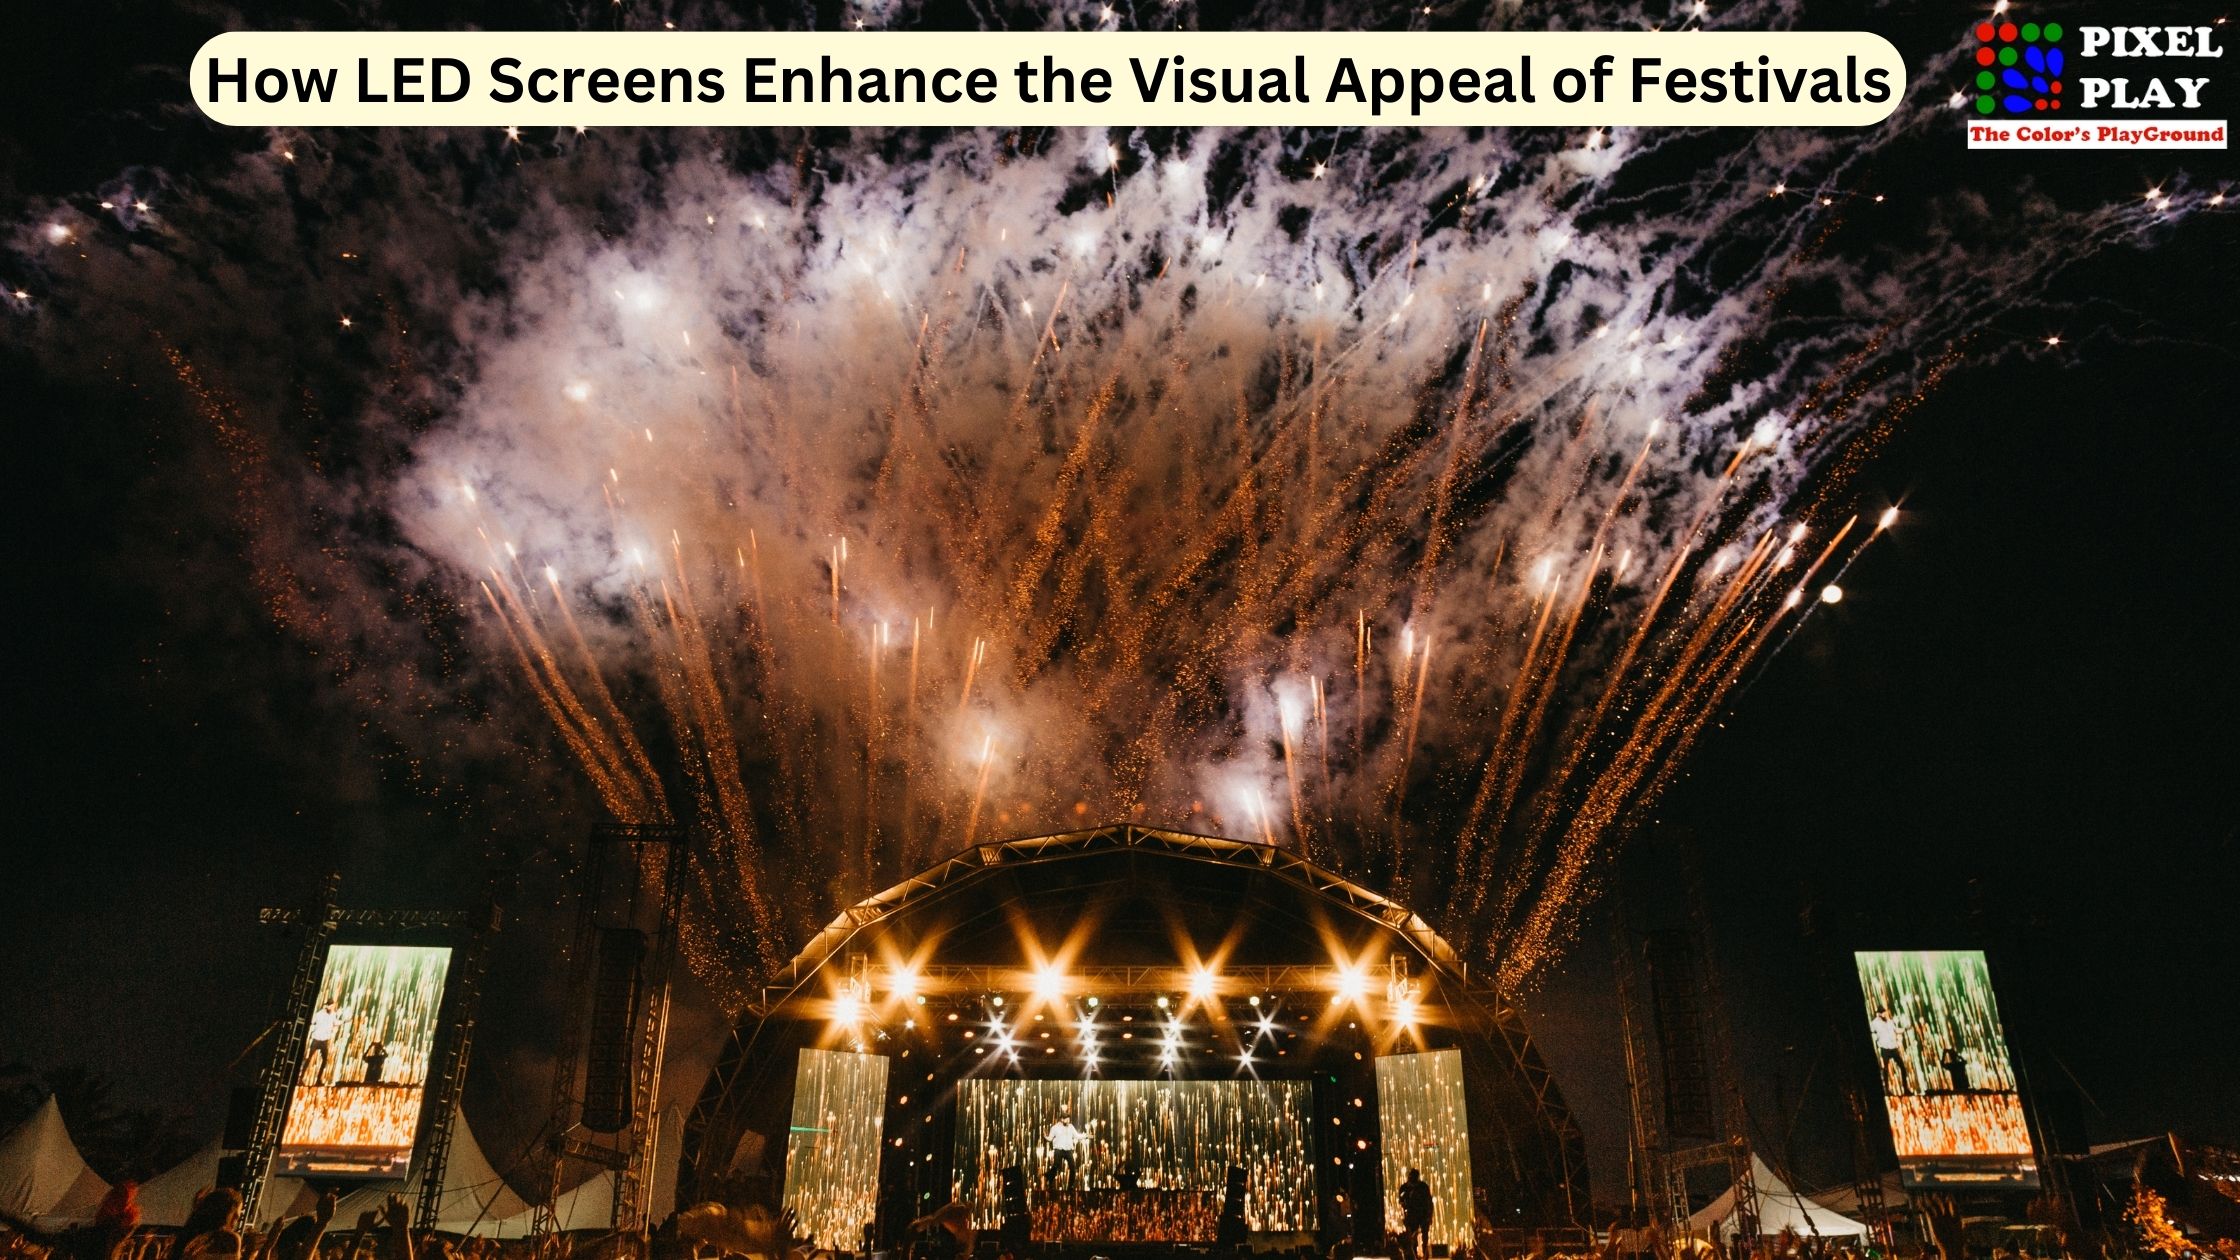 How LED Screens Enhance the Visual Appeal of Festivals